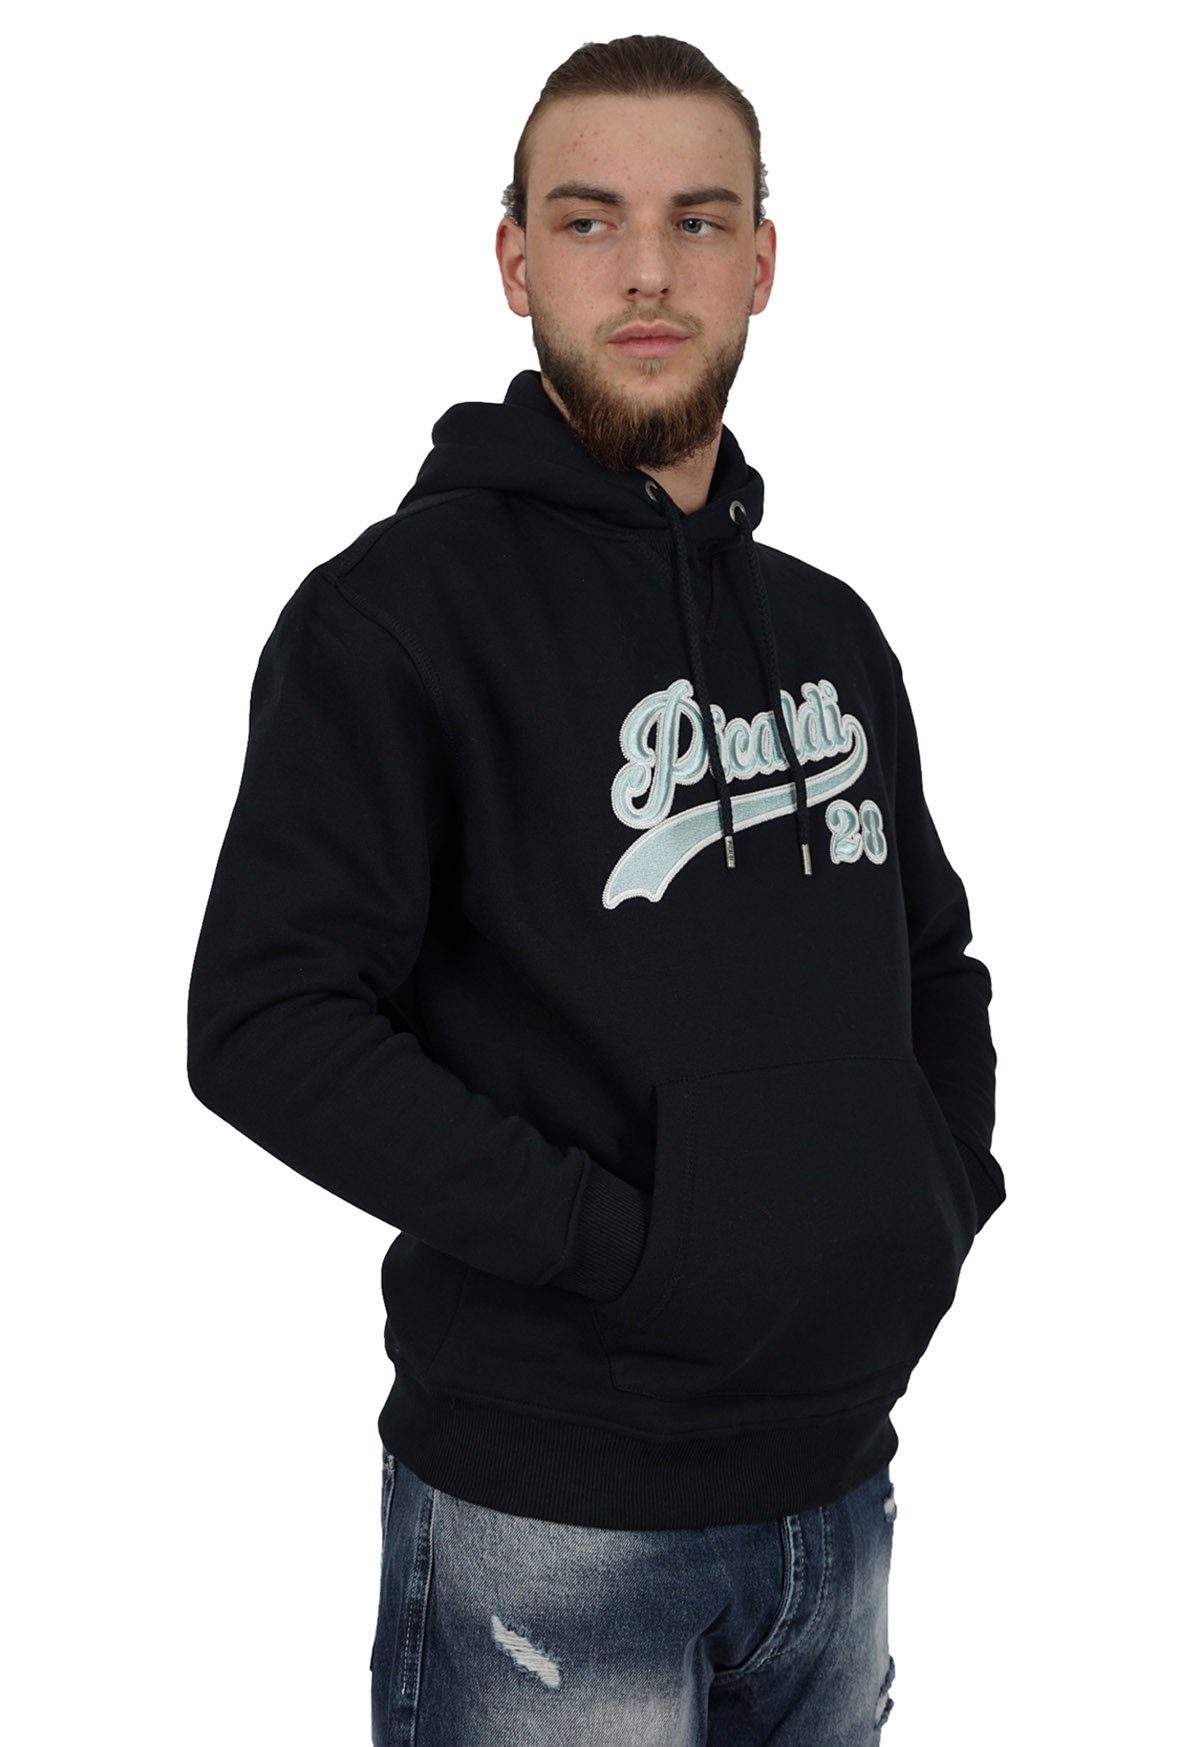 PICALDI Jeans Hoodie »Classical« (1-tlg) kaufen | OTTO